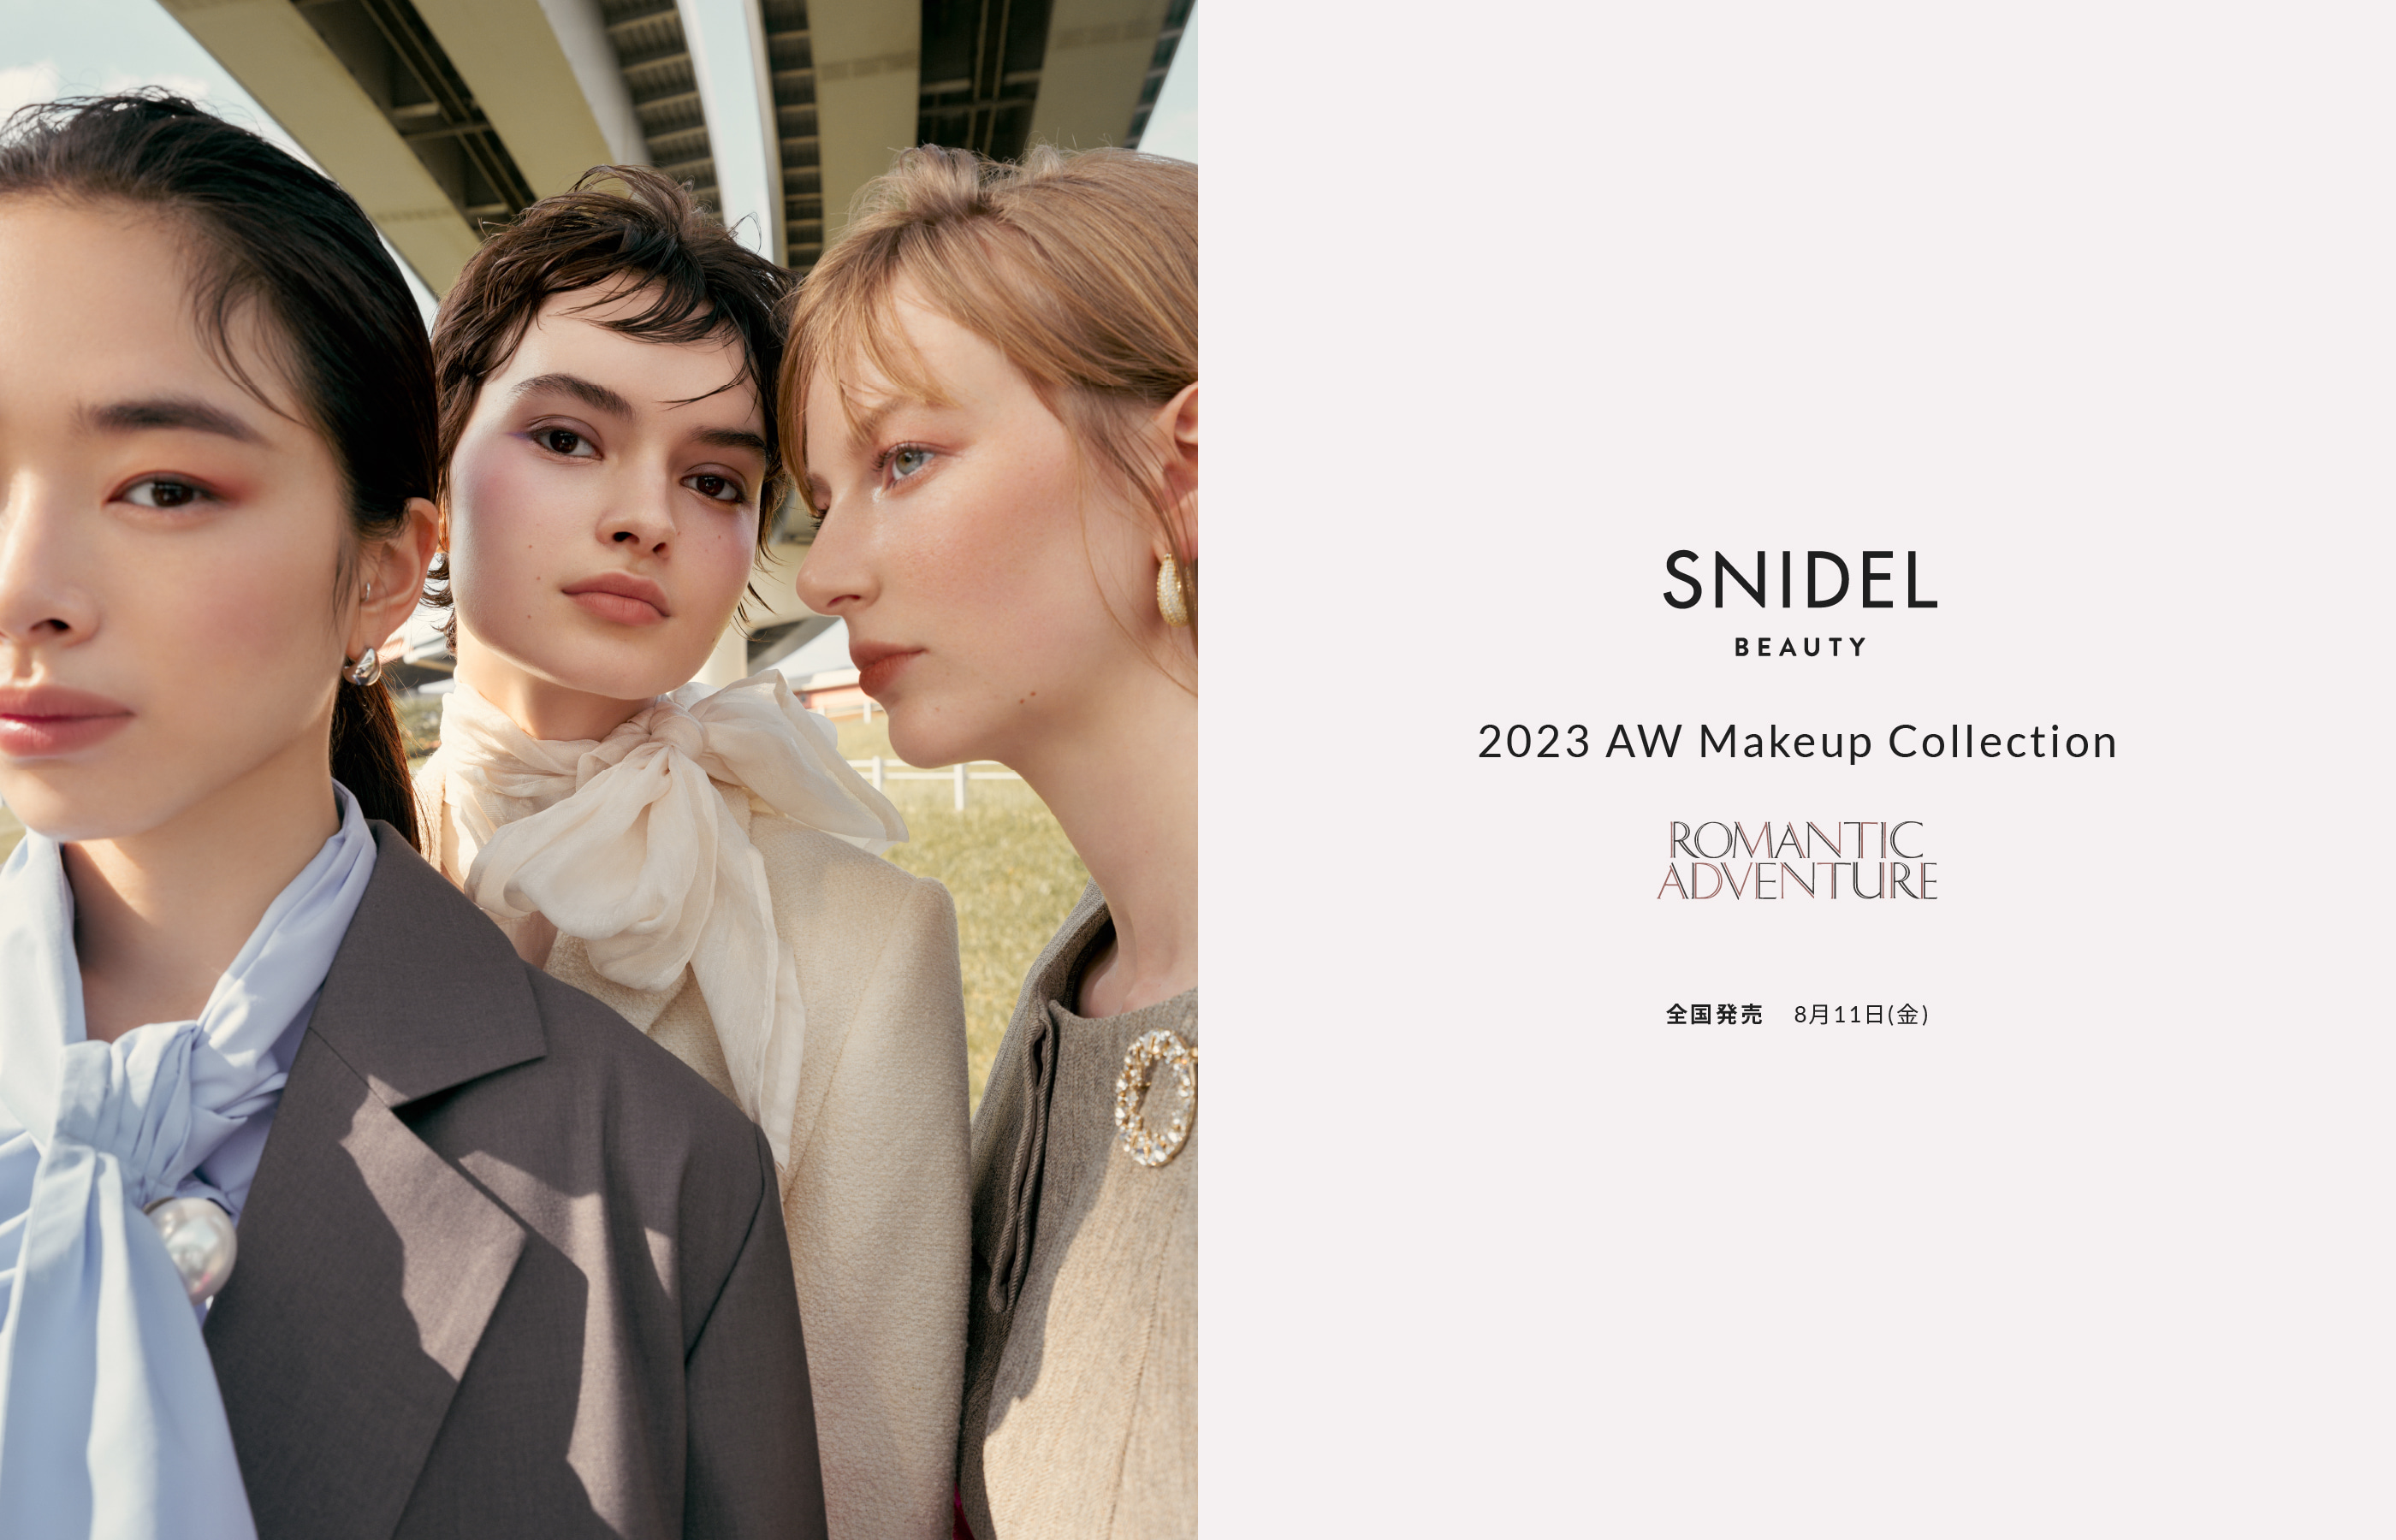 SNIDEL BEAUTY 2023 AW Makeup Collection